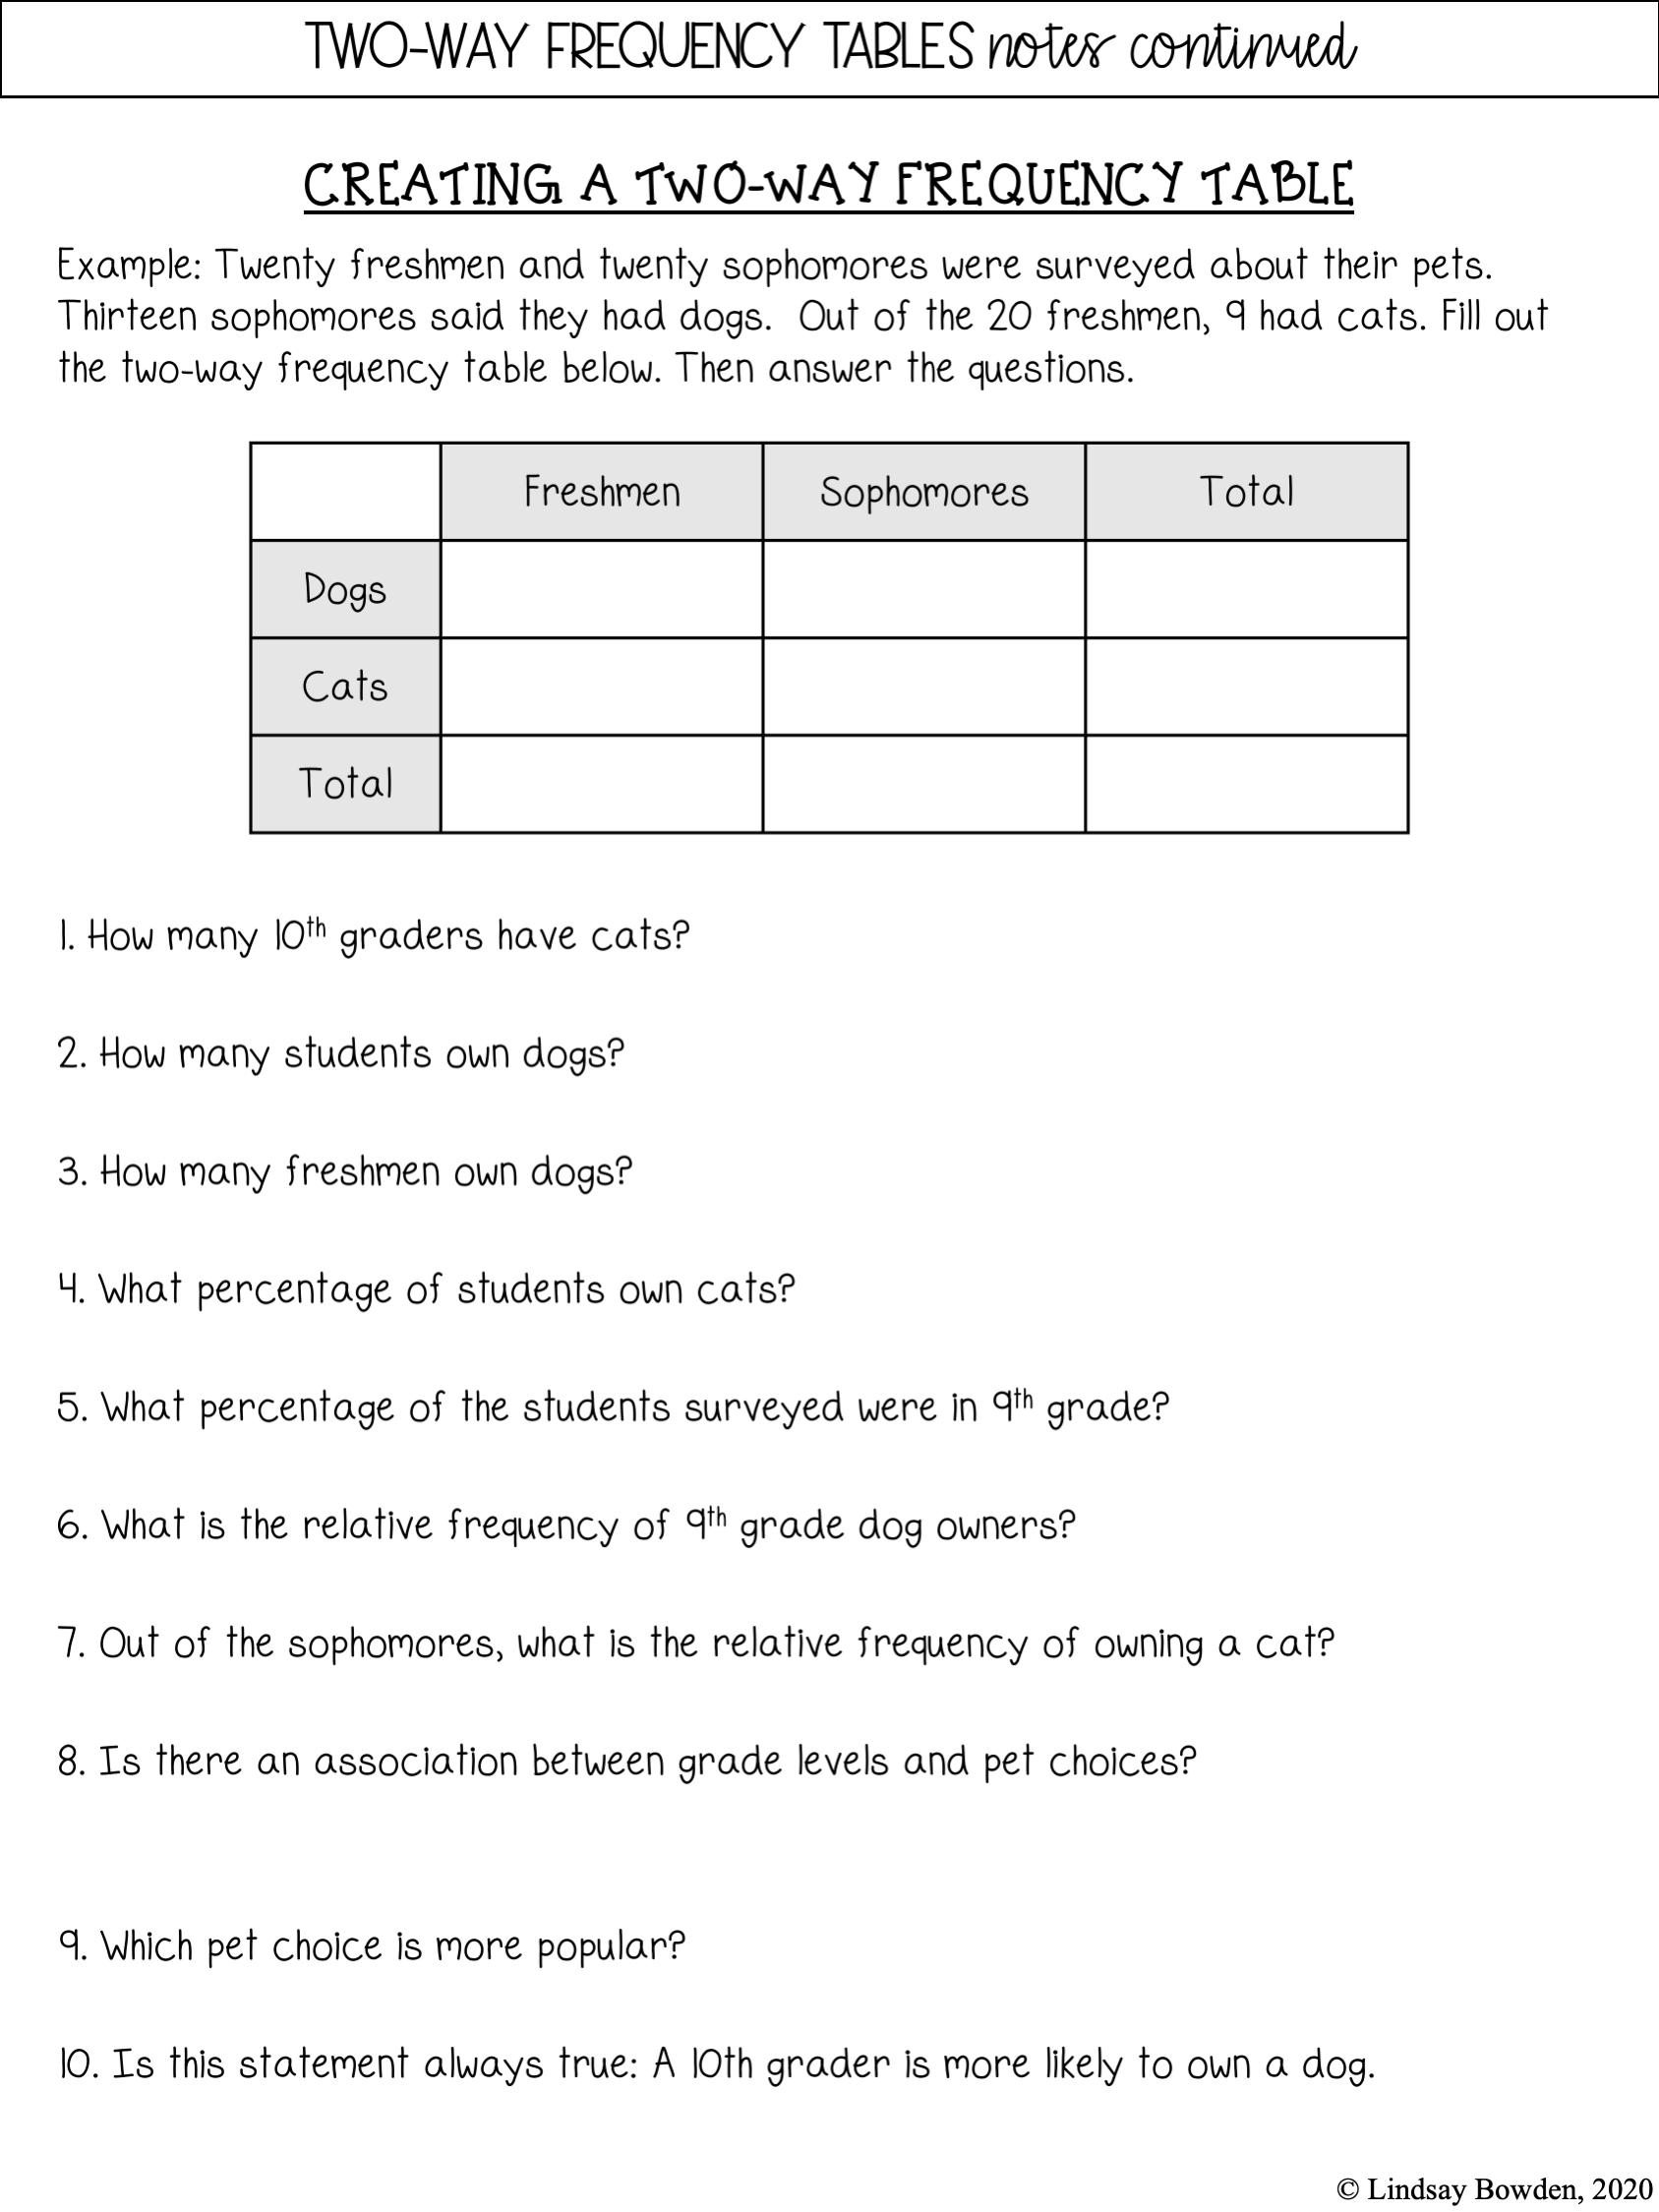 Two-Way Frequency Tables Notes and Worksheets - Lindsay Bowden With Regard To Two Way Frequency Tables Worksheet